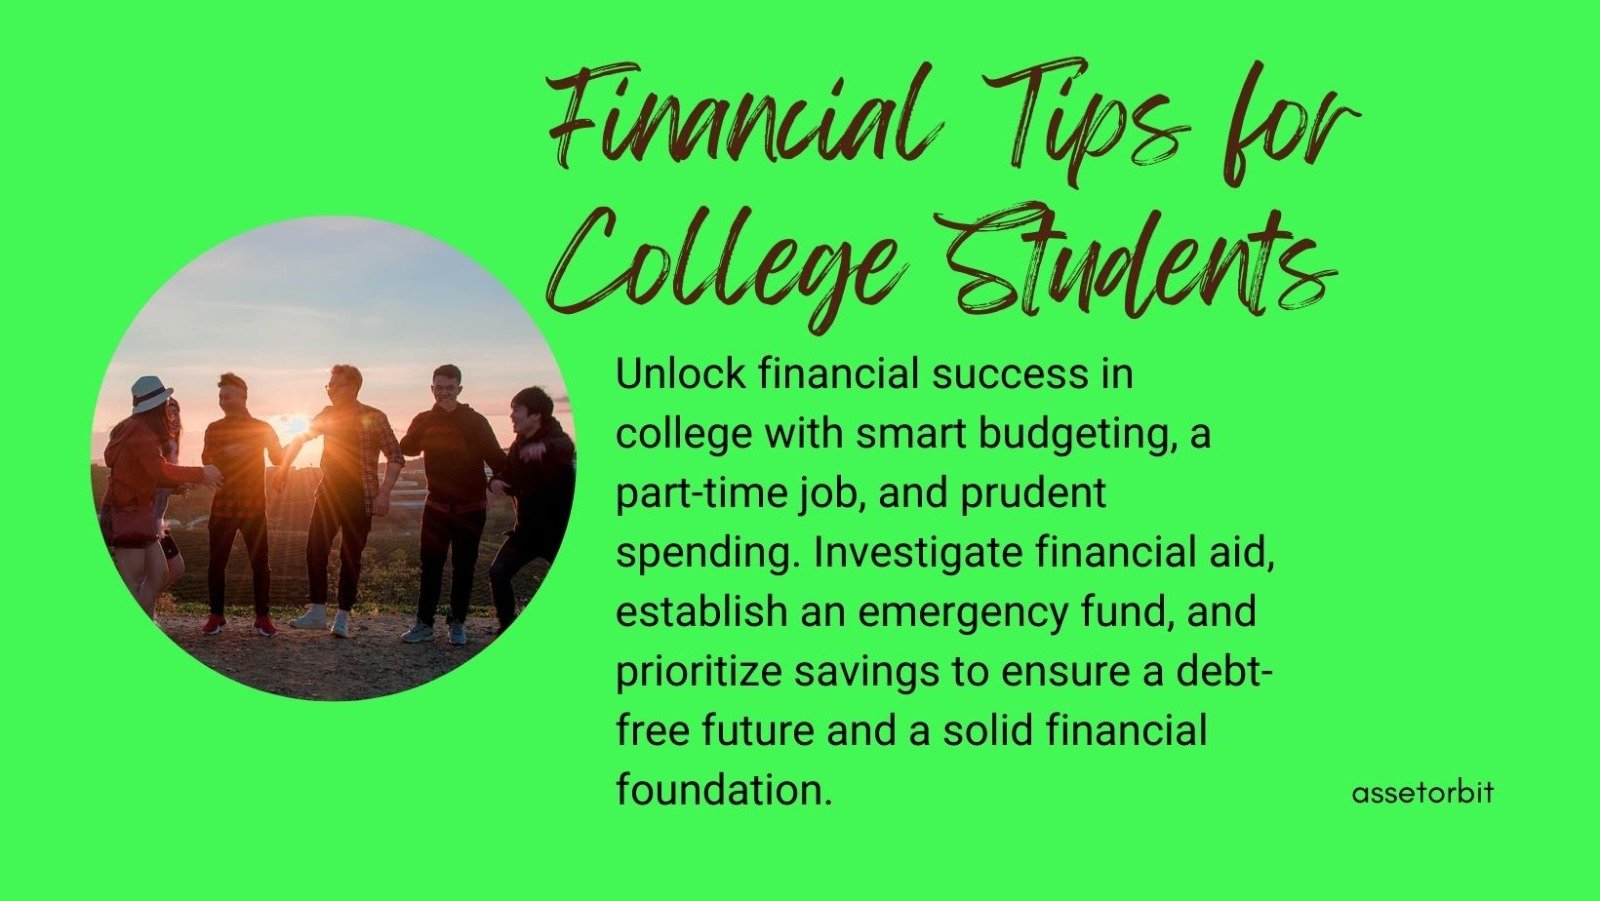 What are The Best Financial Tips for College Students?